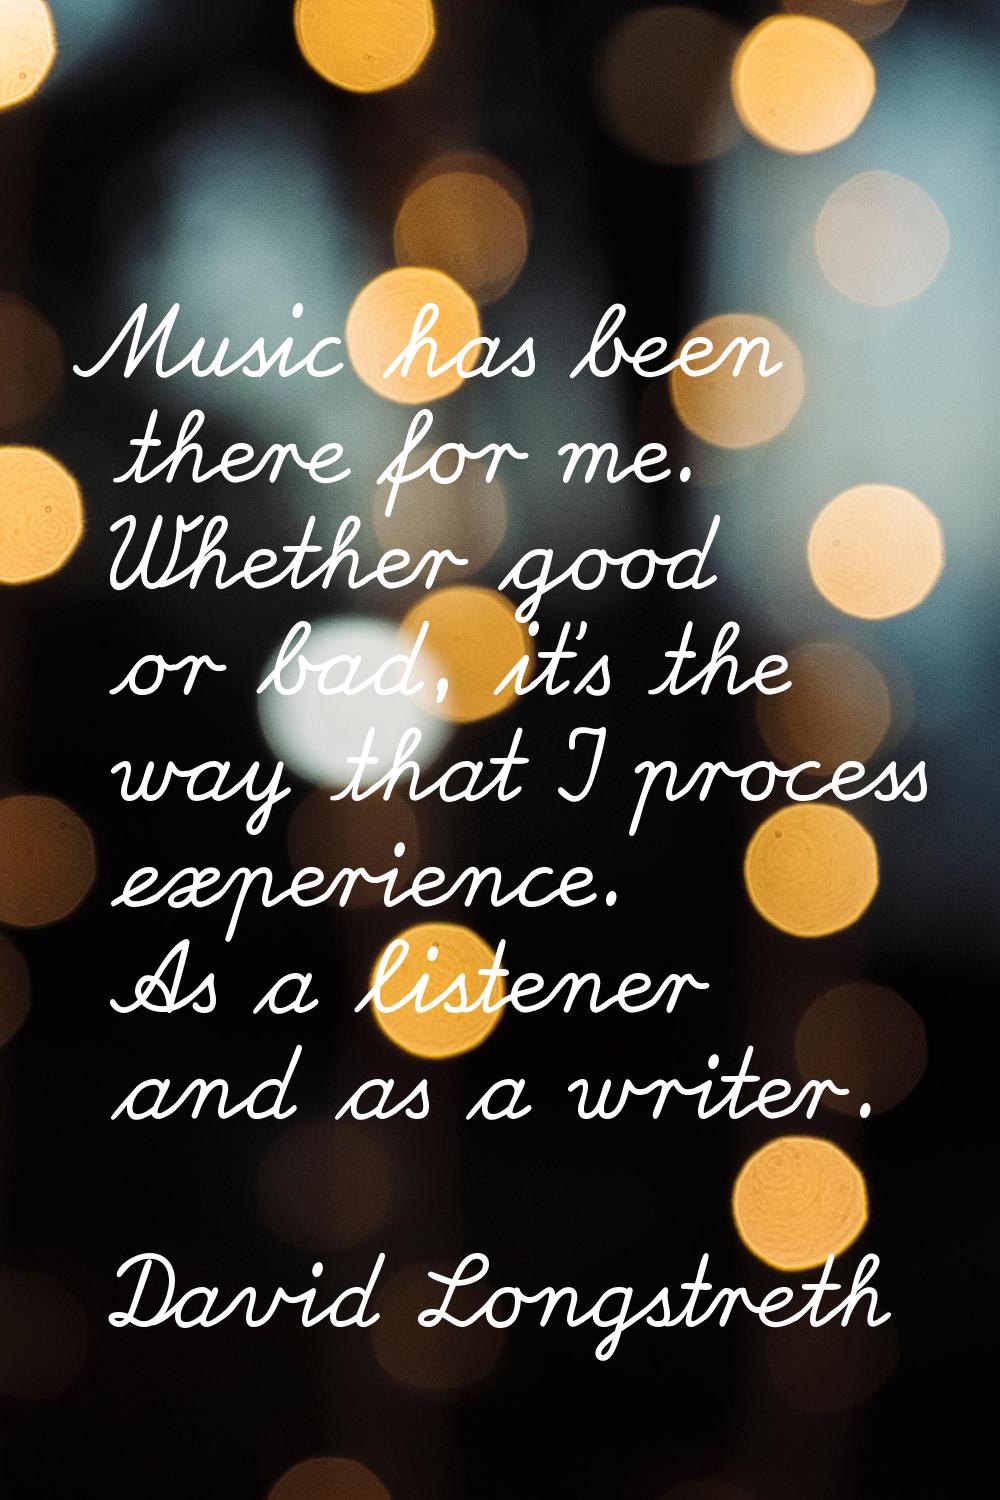 Music has been there for me. Whether good or bad, it's the way that I process experience. As a list